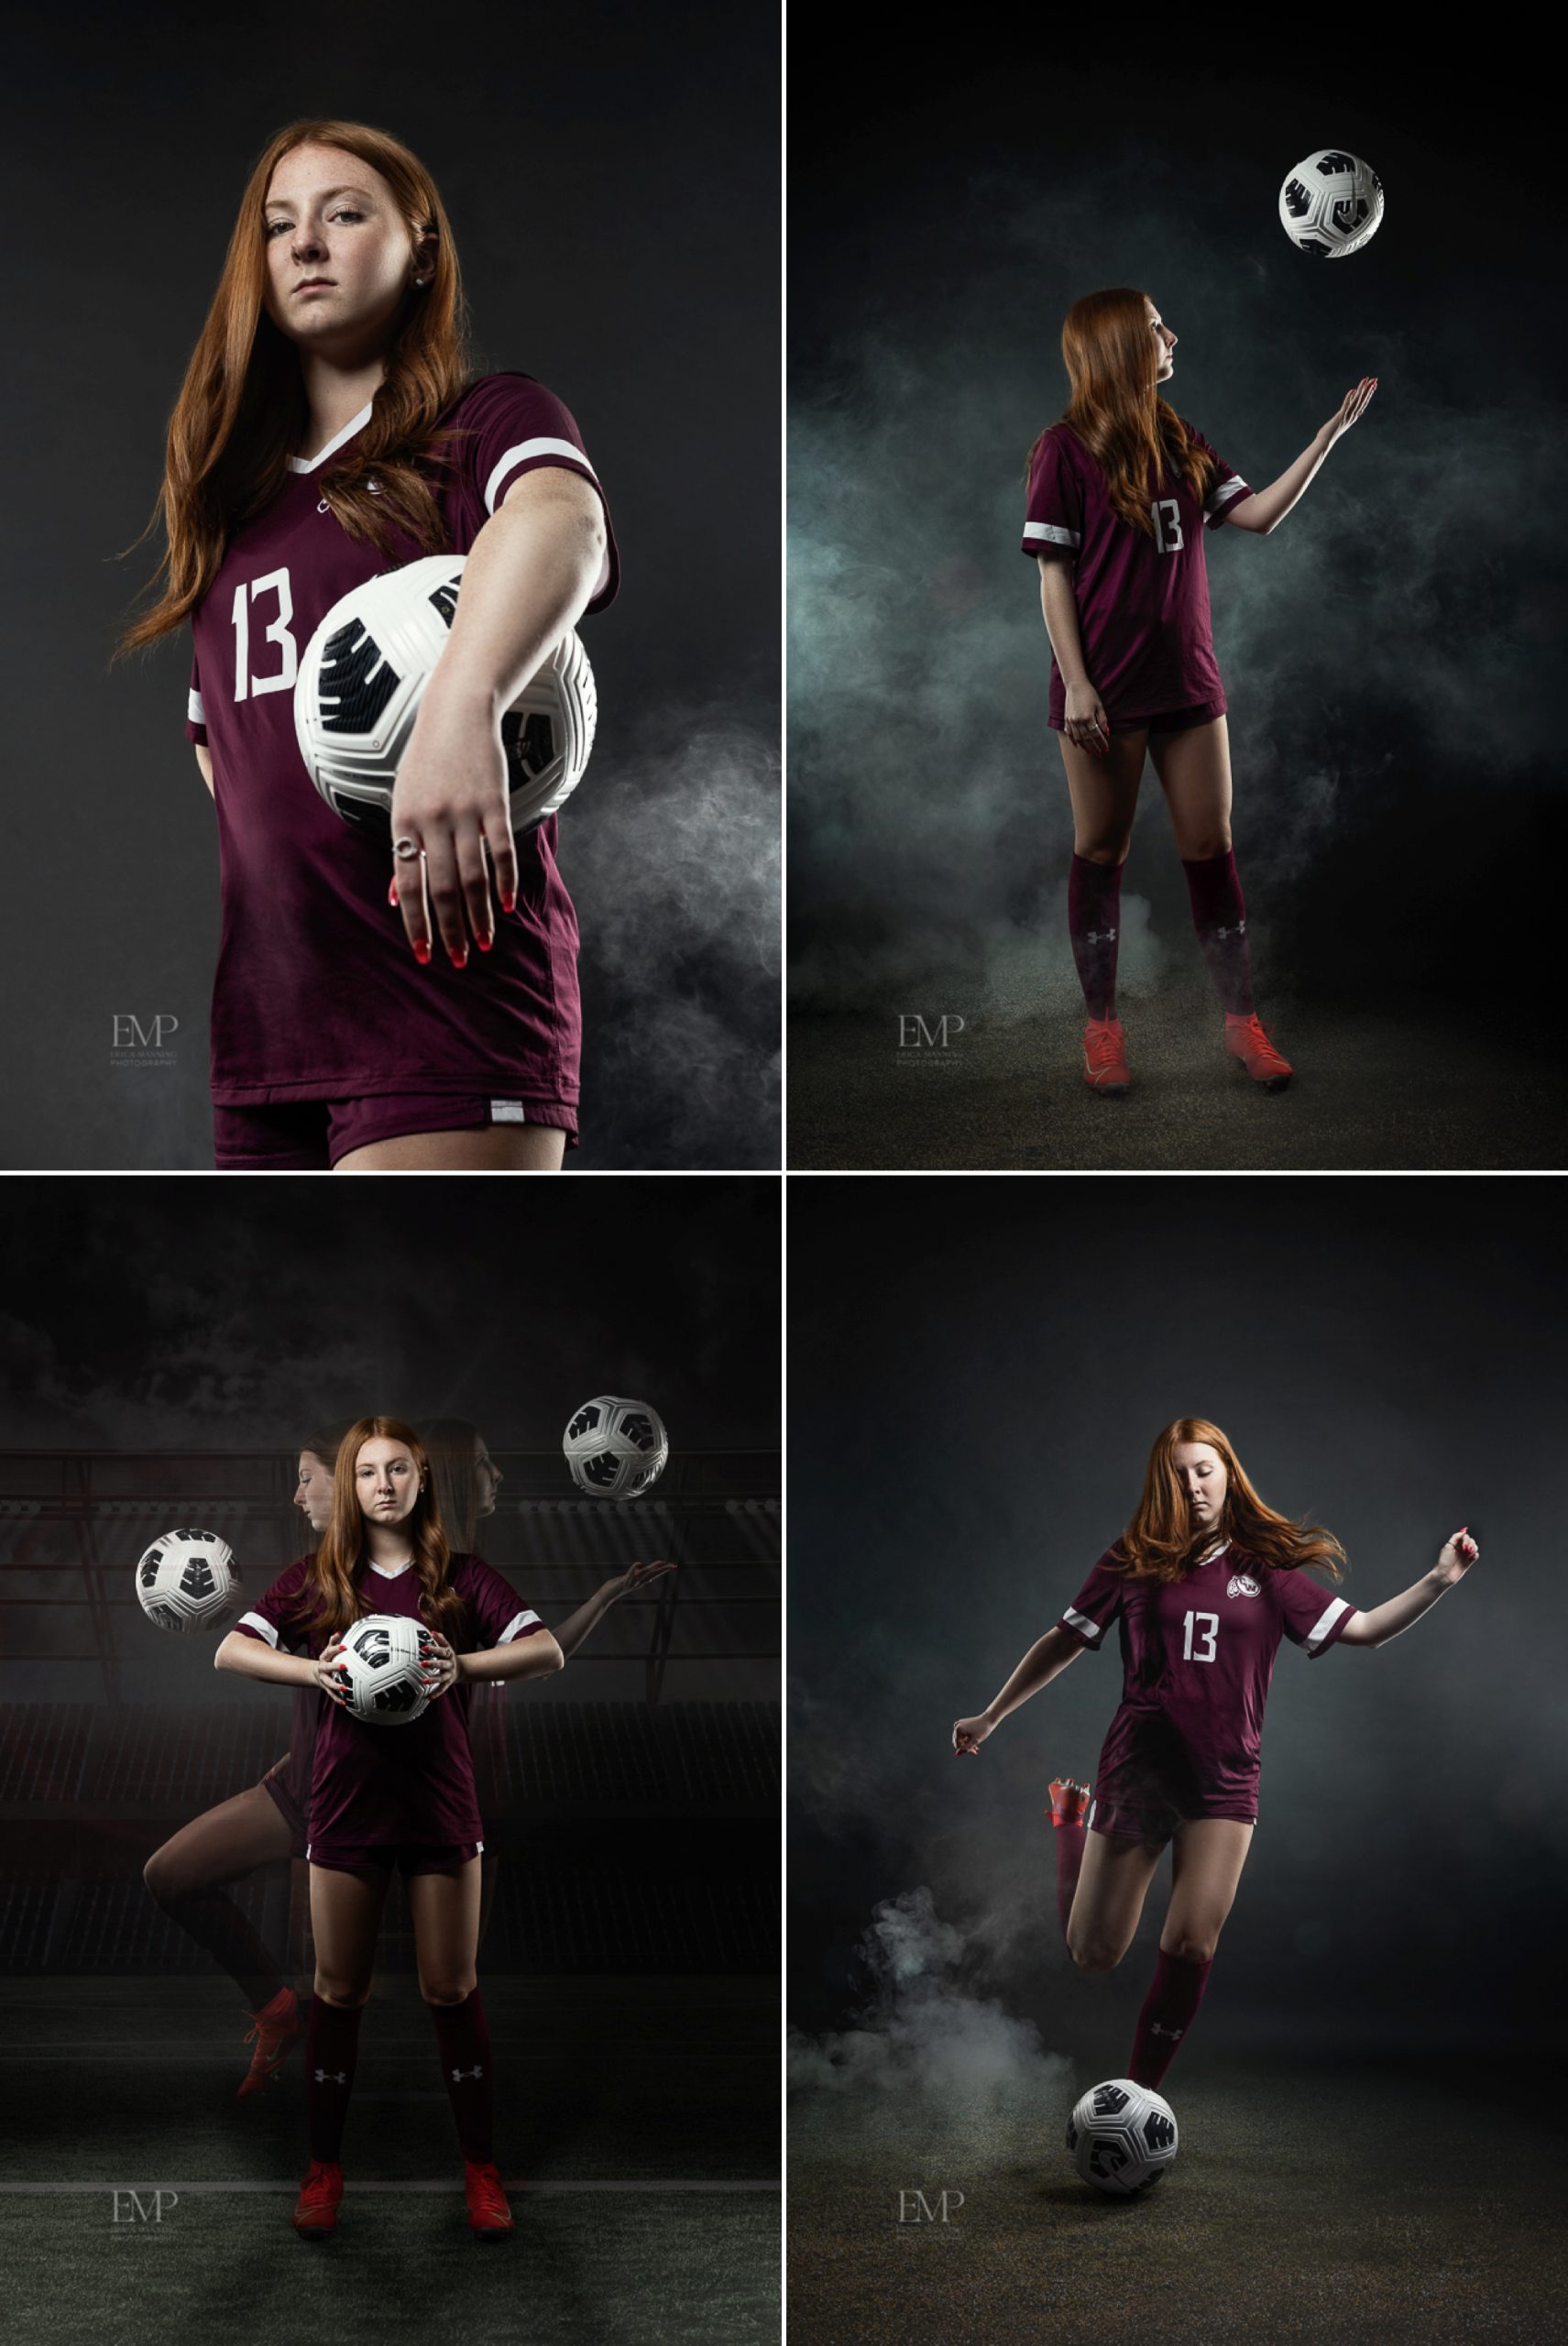 Action athletic creative photography soccer player